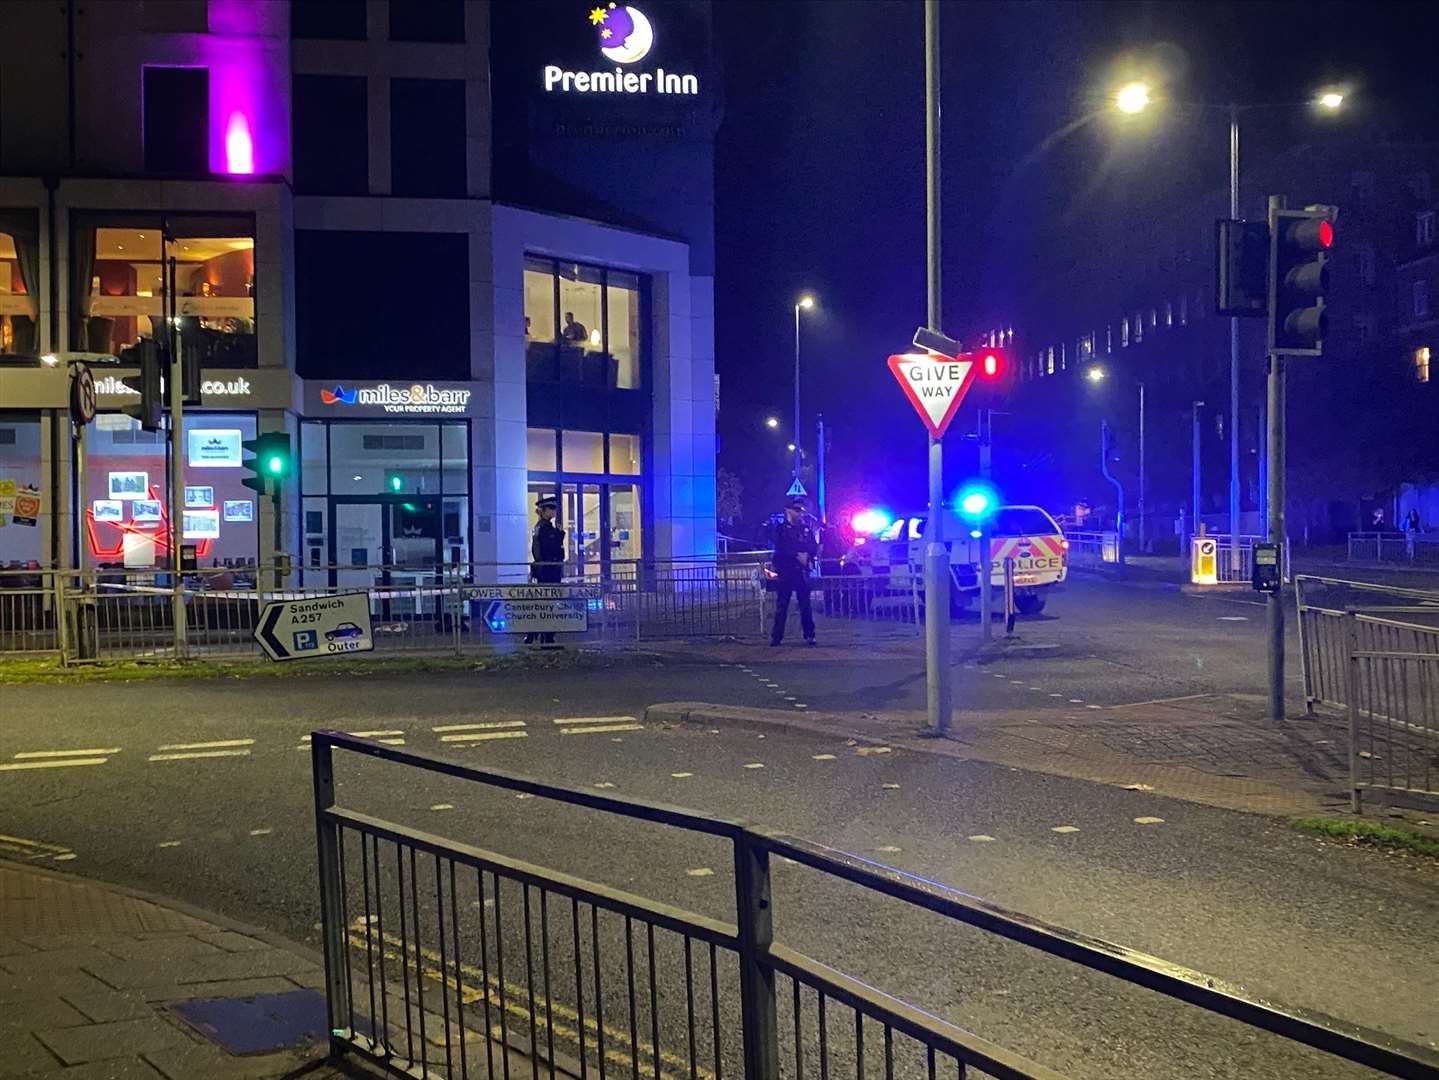 The teenager is said to have collapsed outside Premier Inn in Canterbury. Picture: Oli Picton